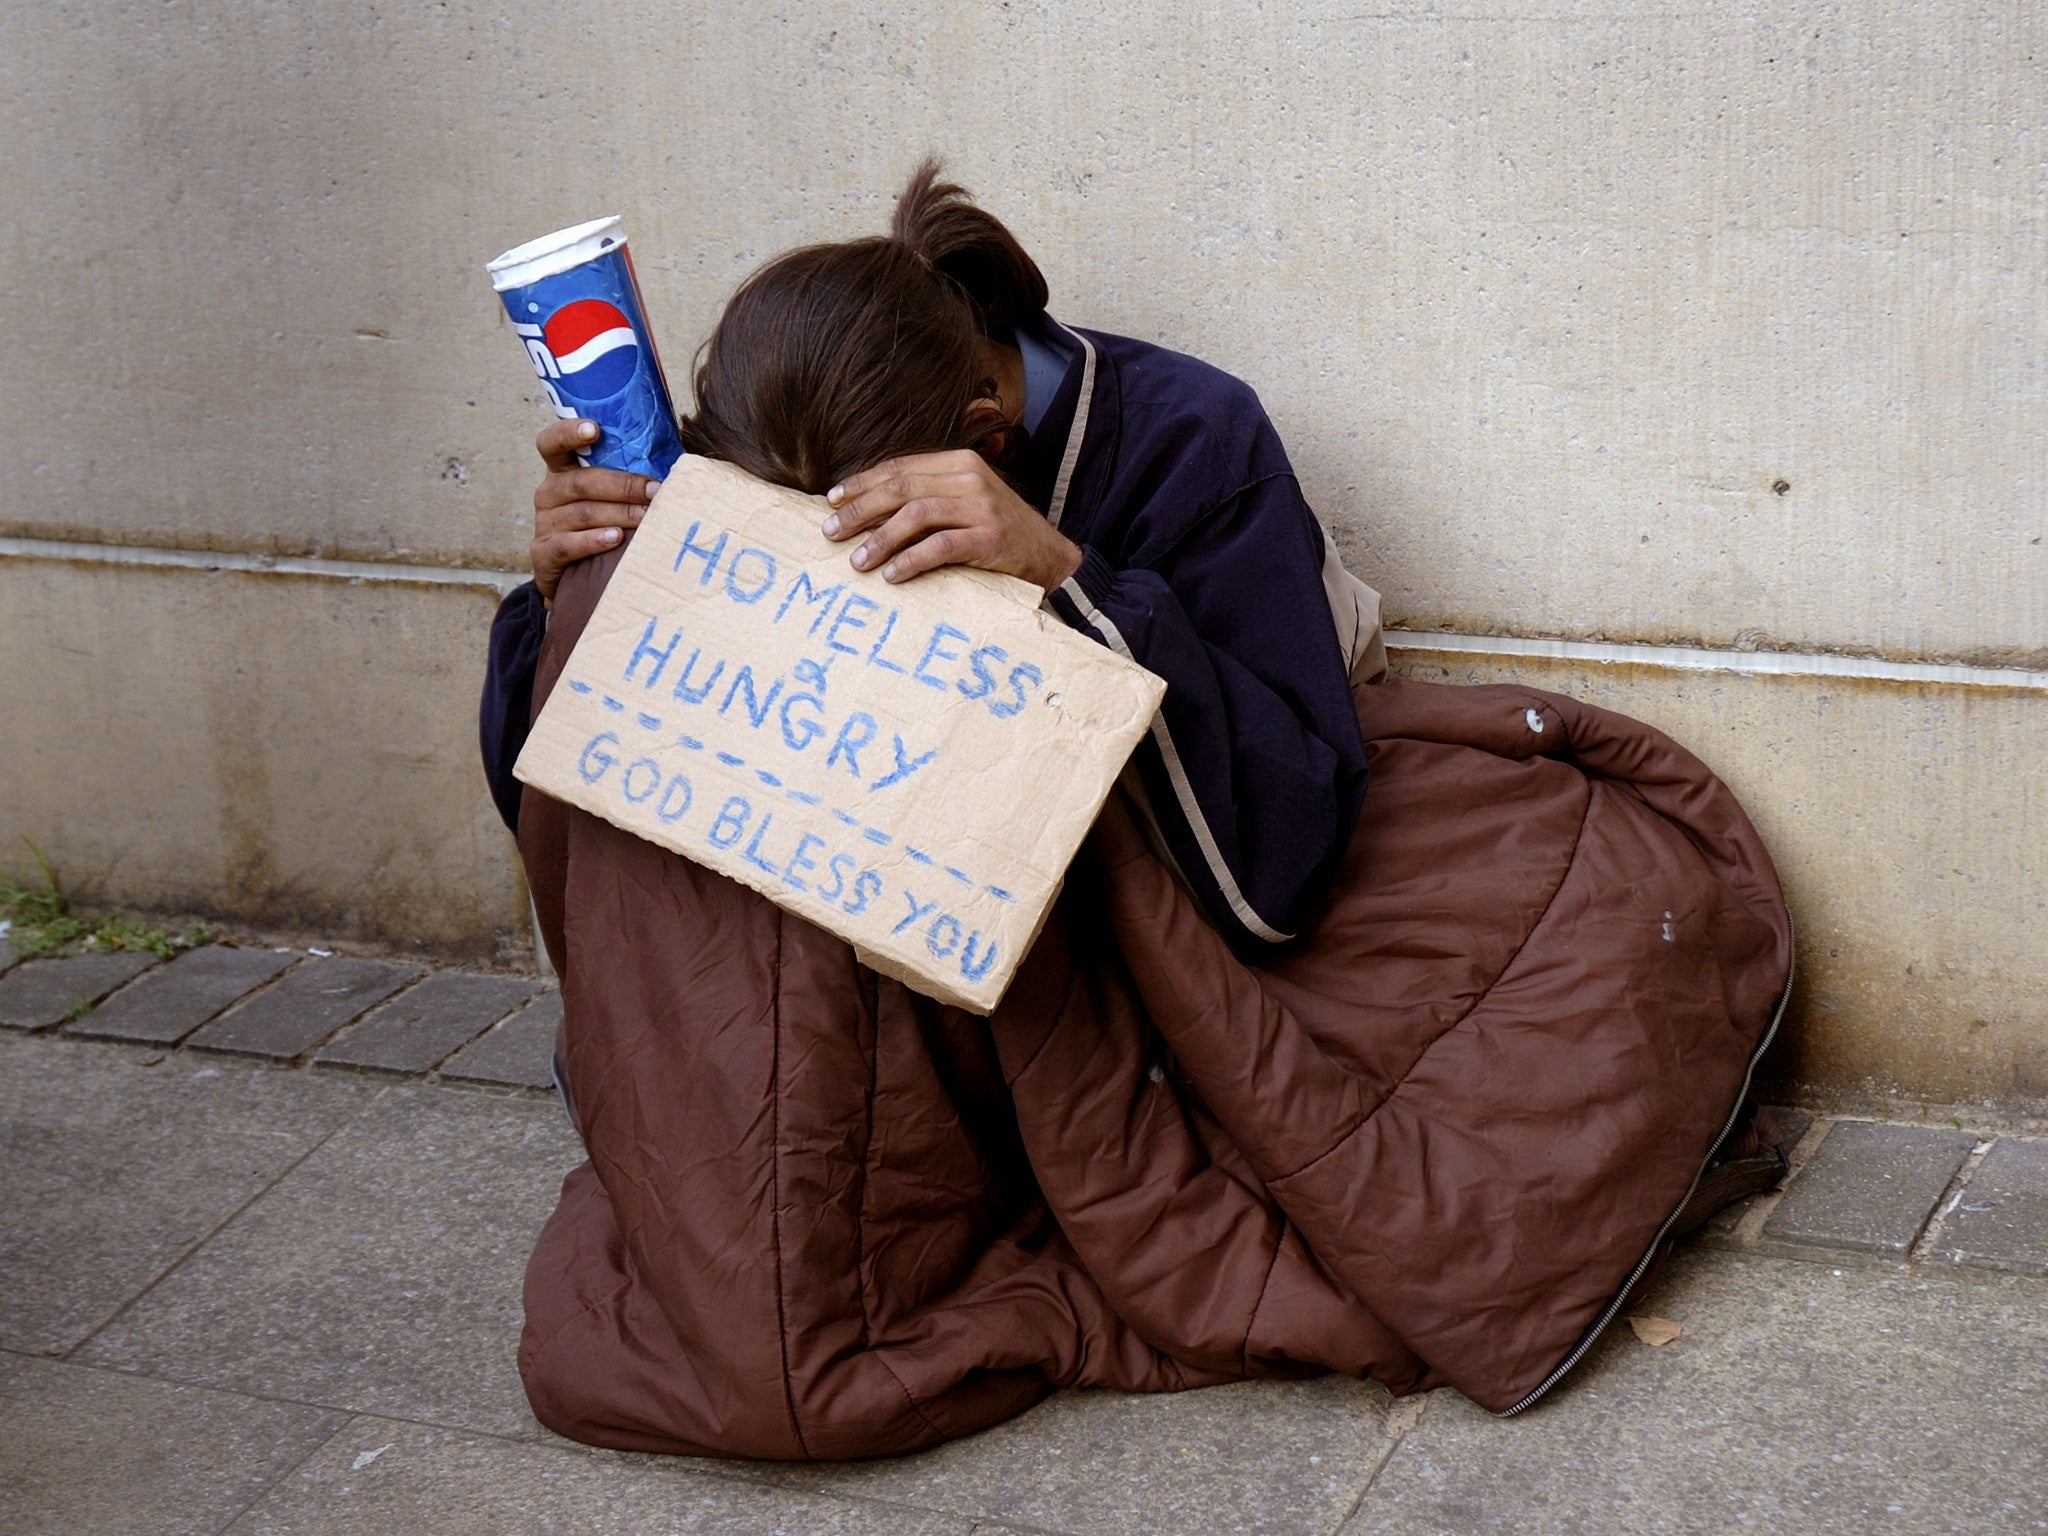 A woman begging on the streets of London